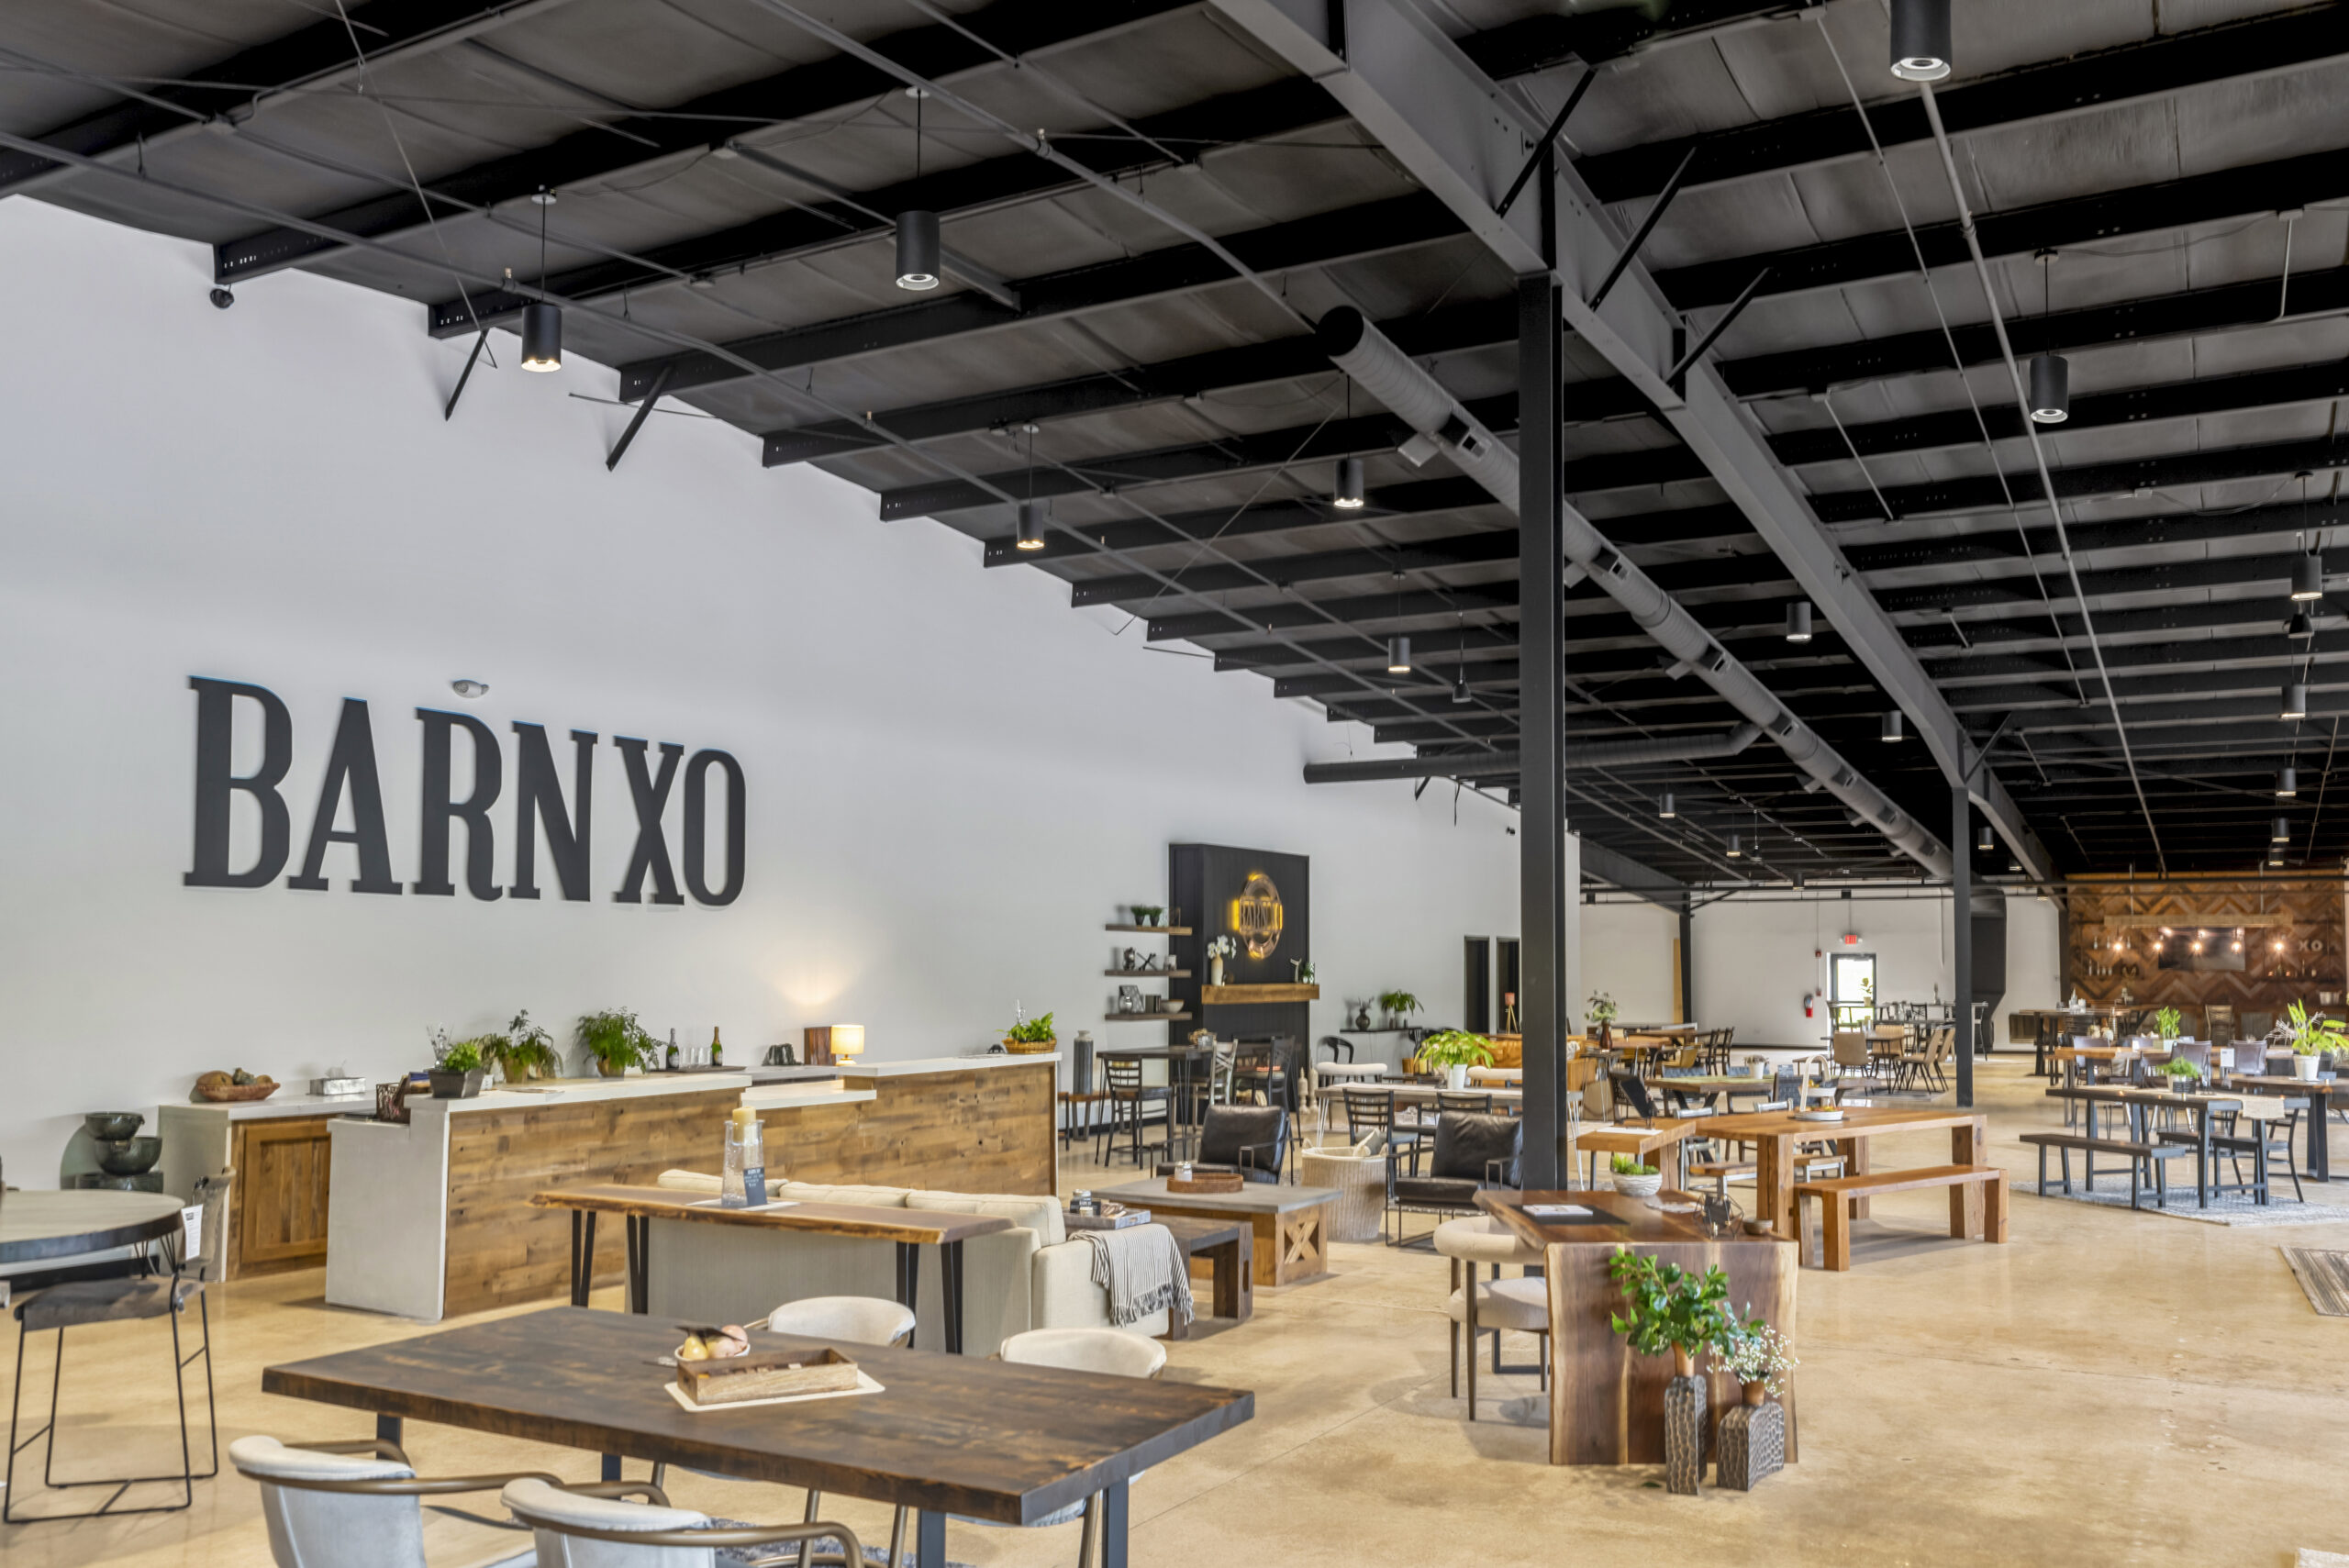 Filamento lights used for high ceiling retail store Barn XO located in Mundelein, Illinois, increasing LED output, reducing glare, and increasing efficiency.